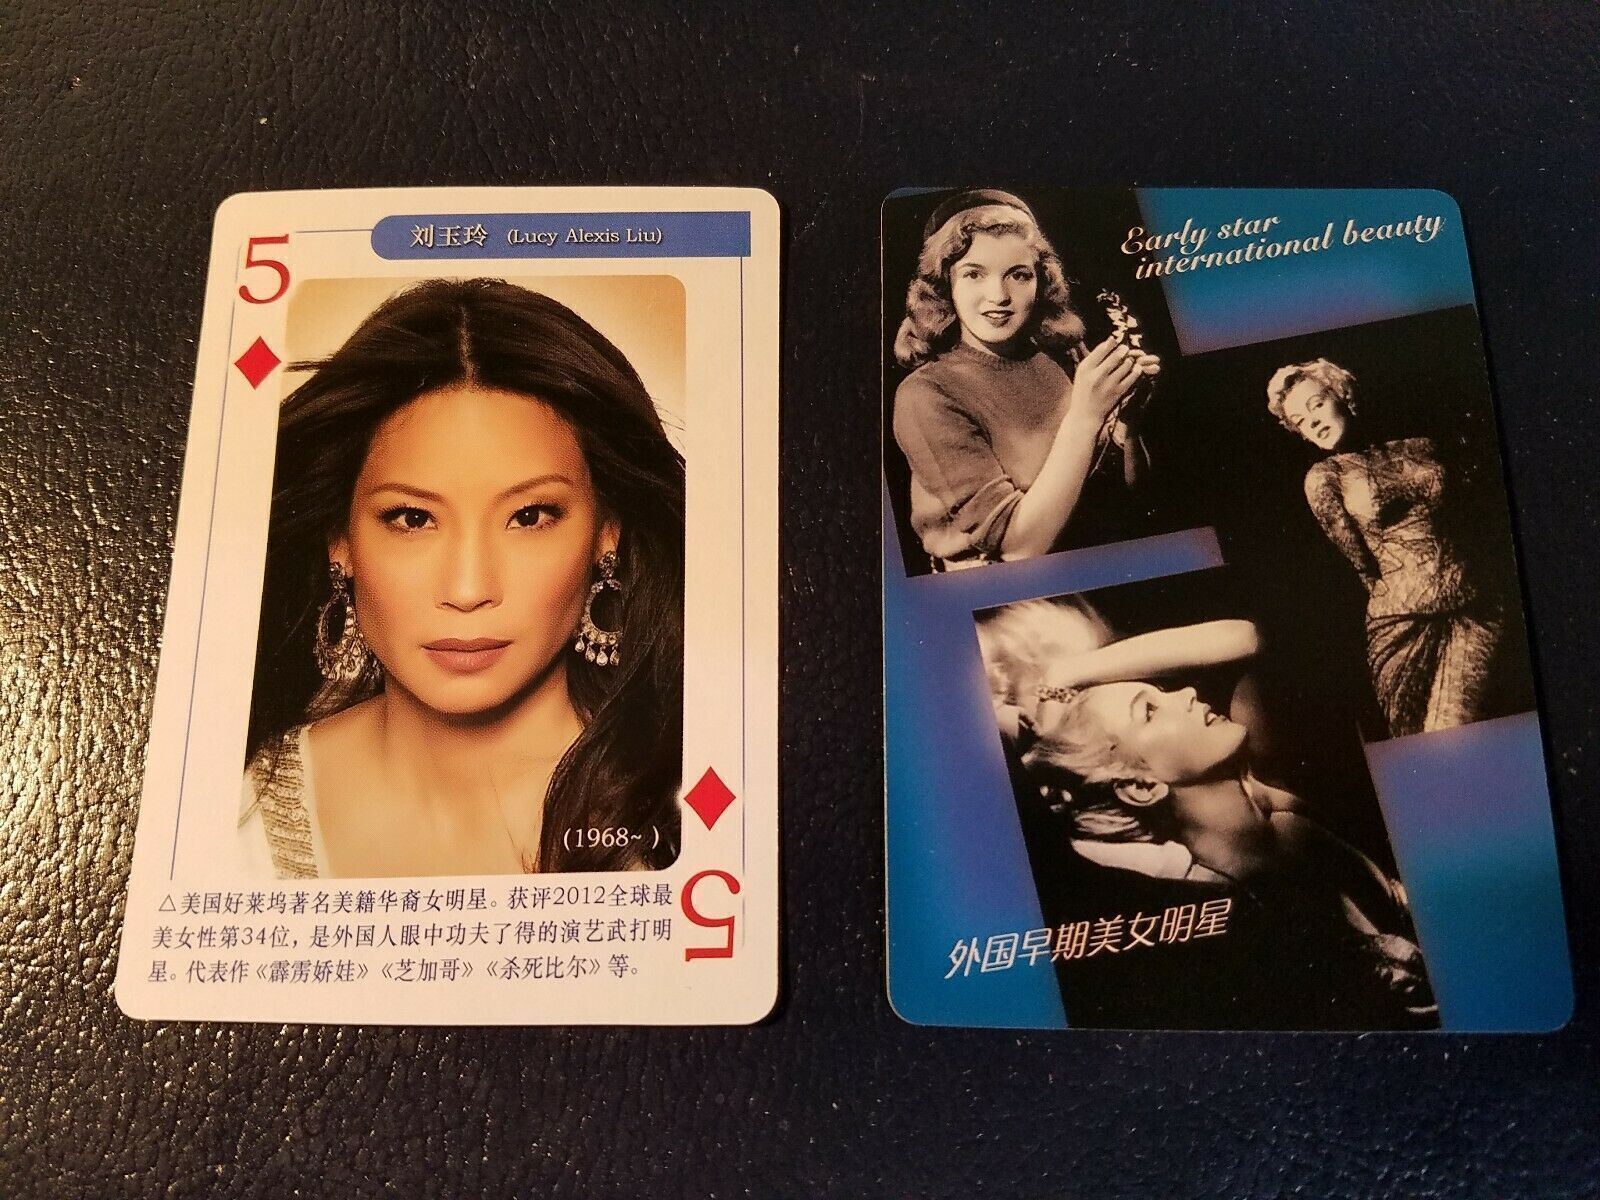 Lucy Liu Actress Early Star International Hollywood Playing Card